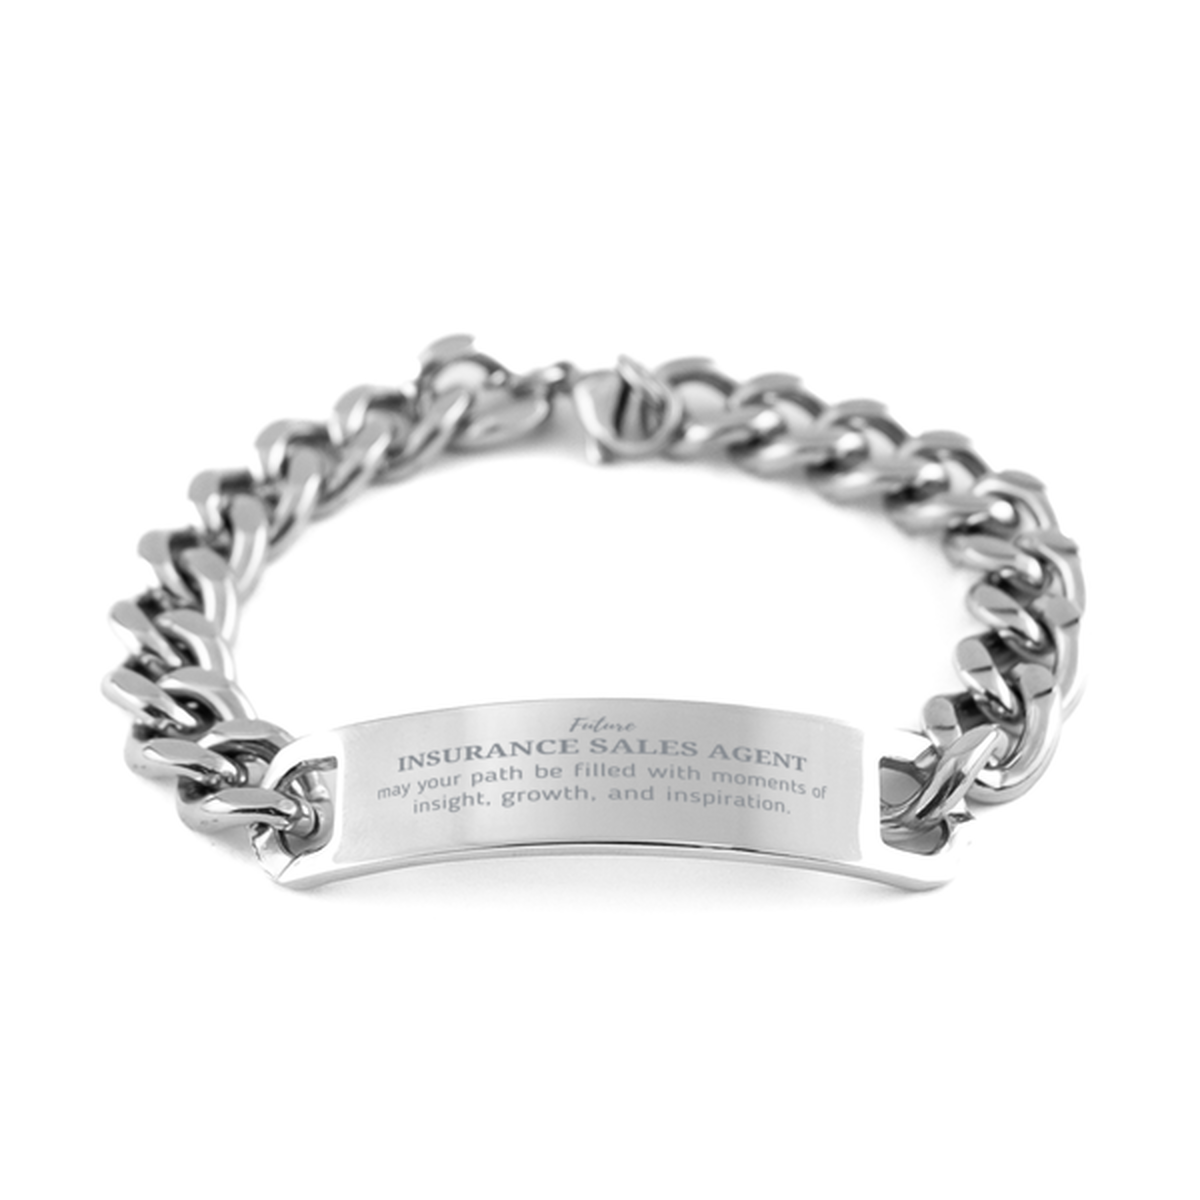 Future Insurance Sales Agent Gifts, May your path be filled with moments of insight, Graduation Gifts for New Insurance Sales Agent, Christmas Unique Cuban Chain Stainless Steel Bracelet For Men, Women, Friends